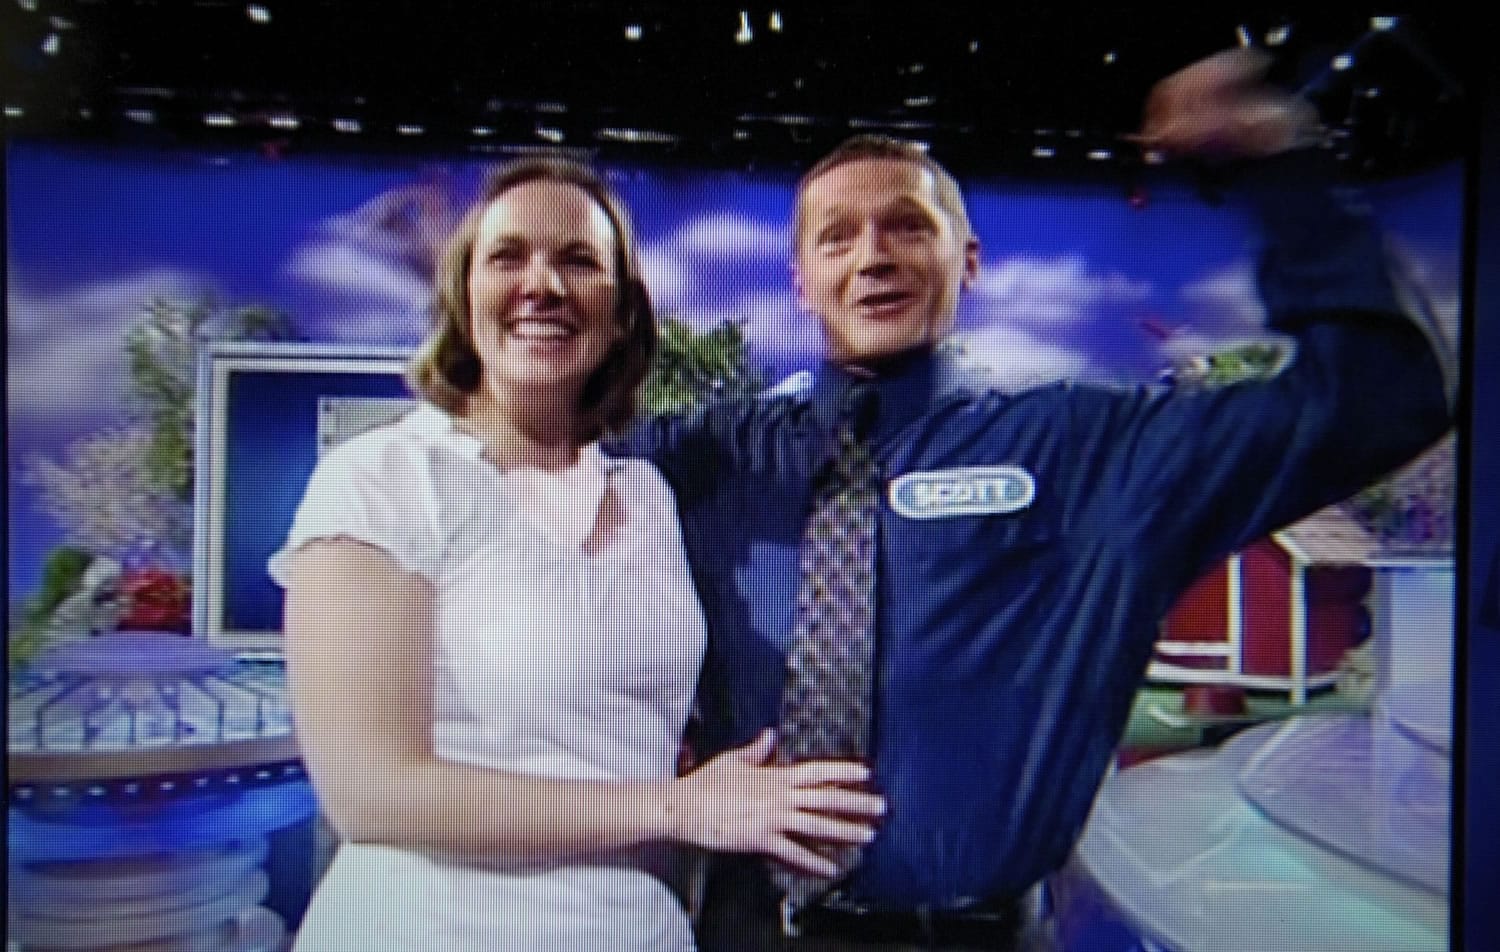 Scott Dole and wife Carrie of Vancouver cheer after Scott won $51,600 on Wheel of Fortune in 2009.